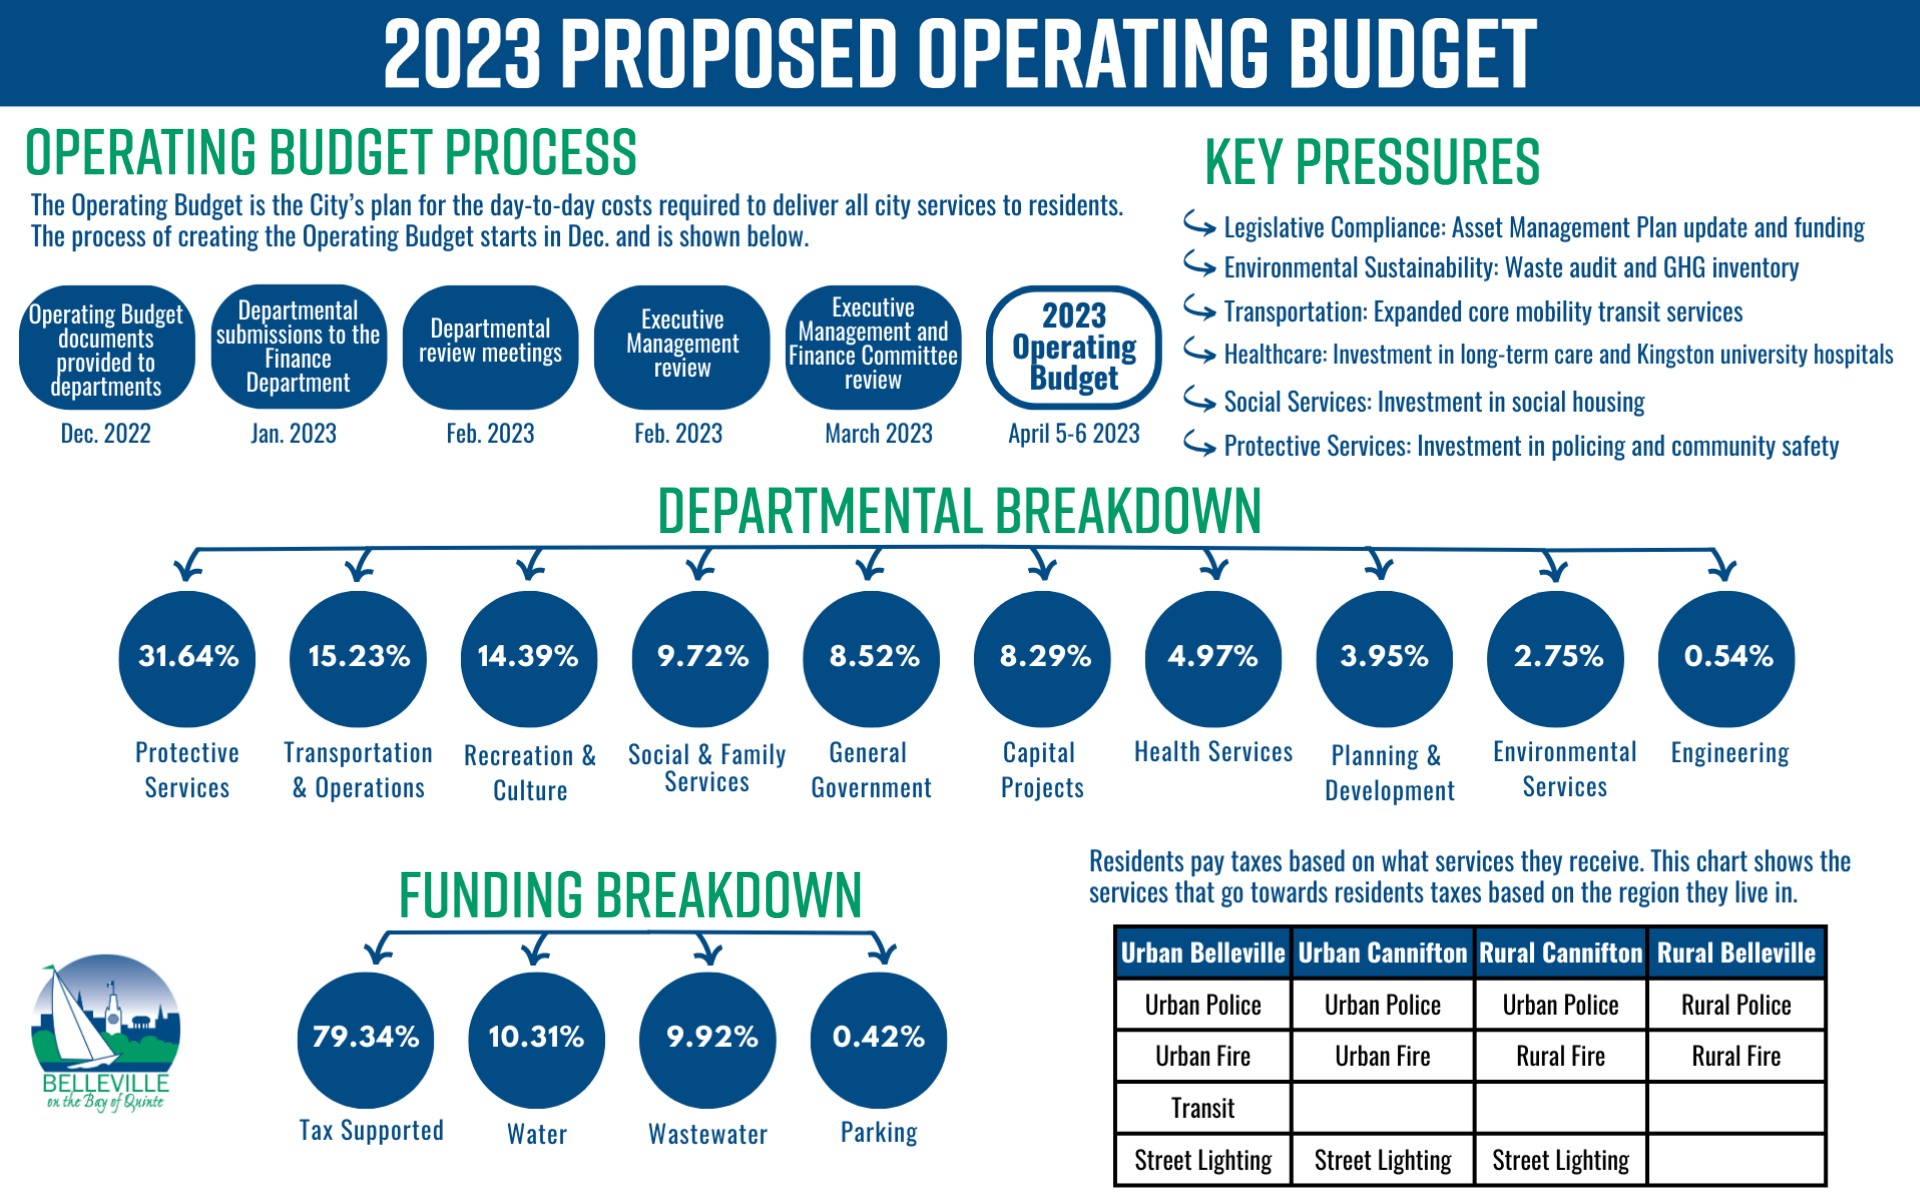 An info graphic of the 2023 Proposed Capital Budget for the City of Belleville. The Operating Budget is the City’s plan for the day-to-day costs required to deliver all city services to residents. The process of creating the Operating Budget starts in Dec. and goes through April. Some key pressures include: Legislative Compliance: Asset Management Plan update and funding, Environmental Sustainability: Waste audit and GHG inventory, Healthcare: Investment in long-term care and Kingston university hospitals, Transportation: Expanded core mobility transit services, Social Services: Investment in social housing, and Protective Services: Investment in policing and community safety. 